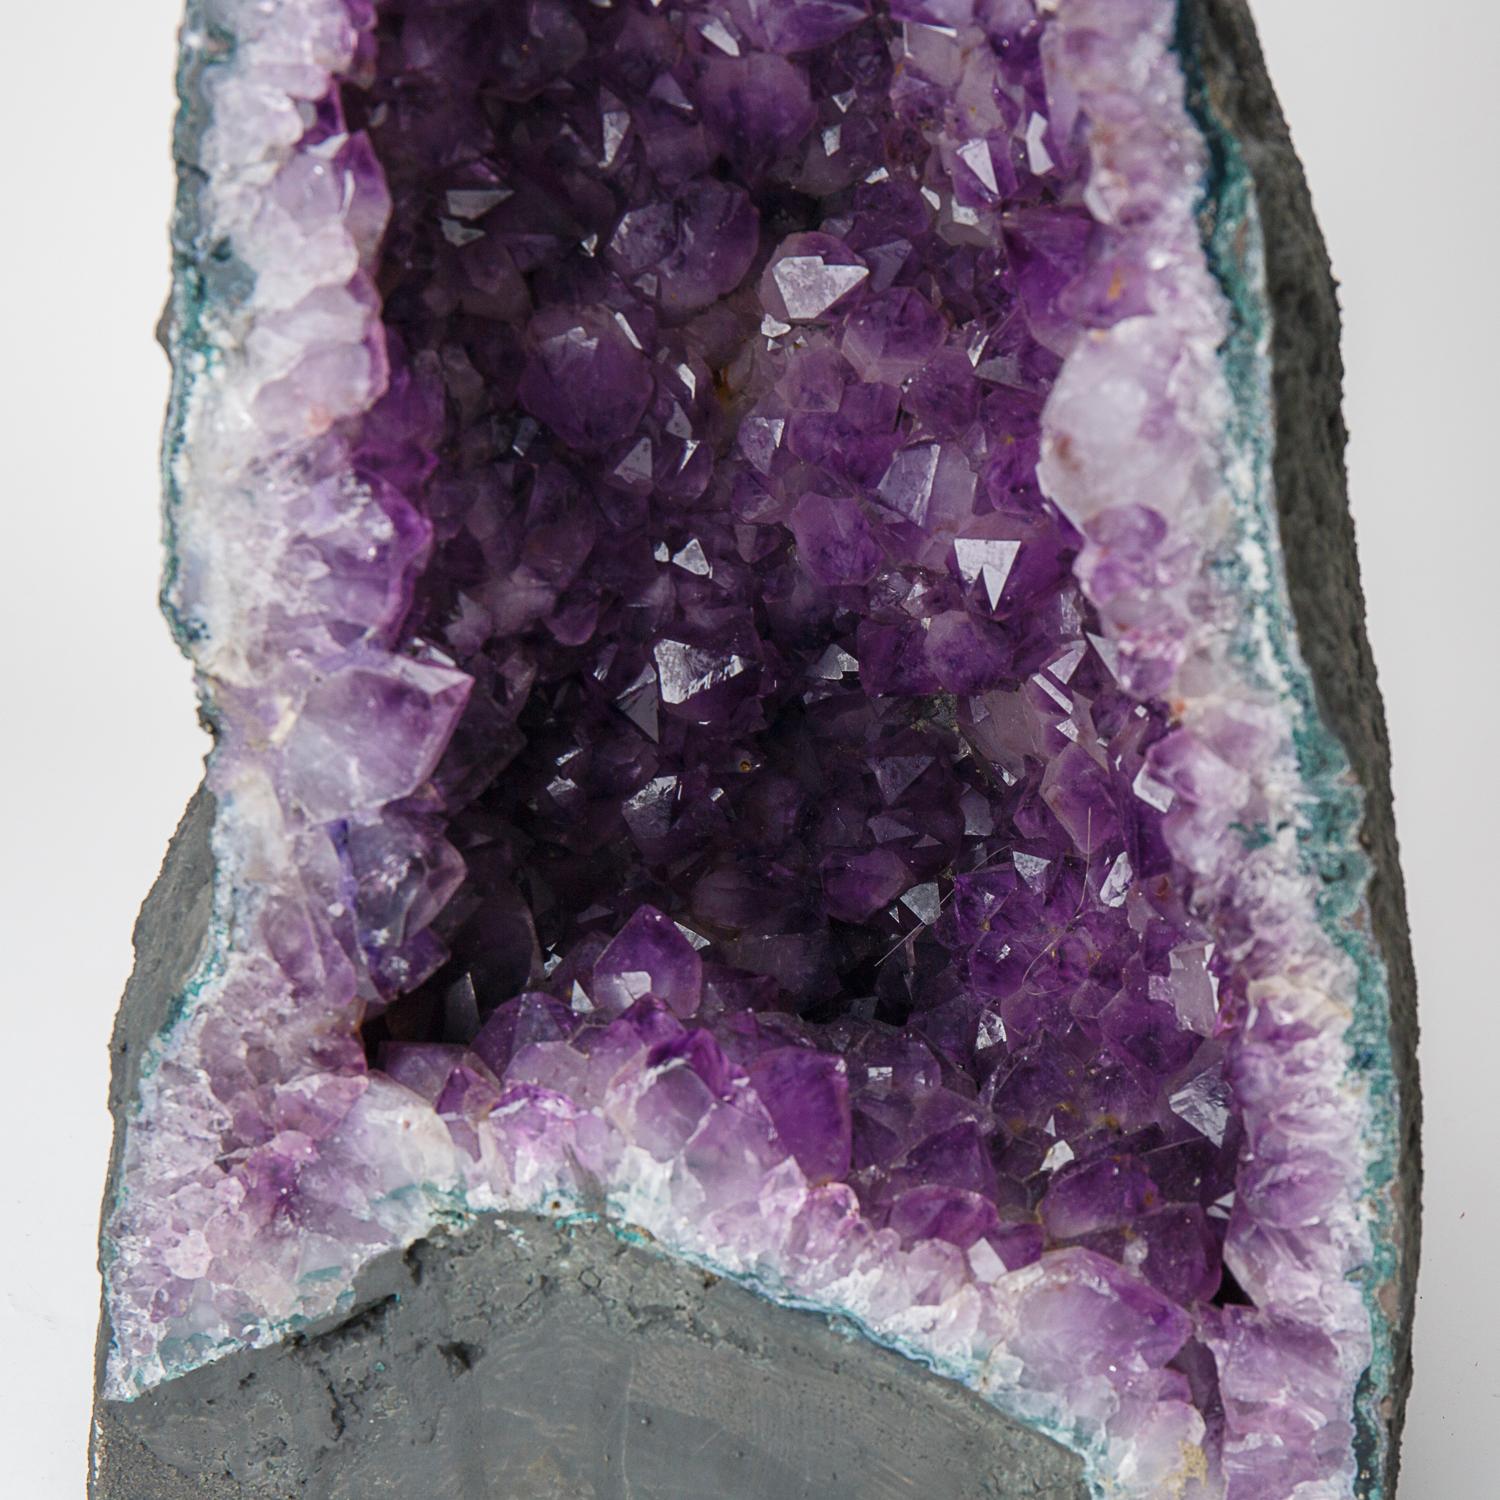 This Genuine Amethyst Cluster Geode from Brazil is a top quality natural formation of gem amethyst. The half geode cathedral decor features lustrous fully terminated crystals with highly reflective faces and a deep, transparent to translucent grape